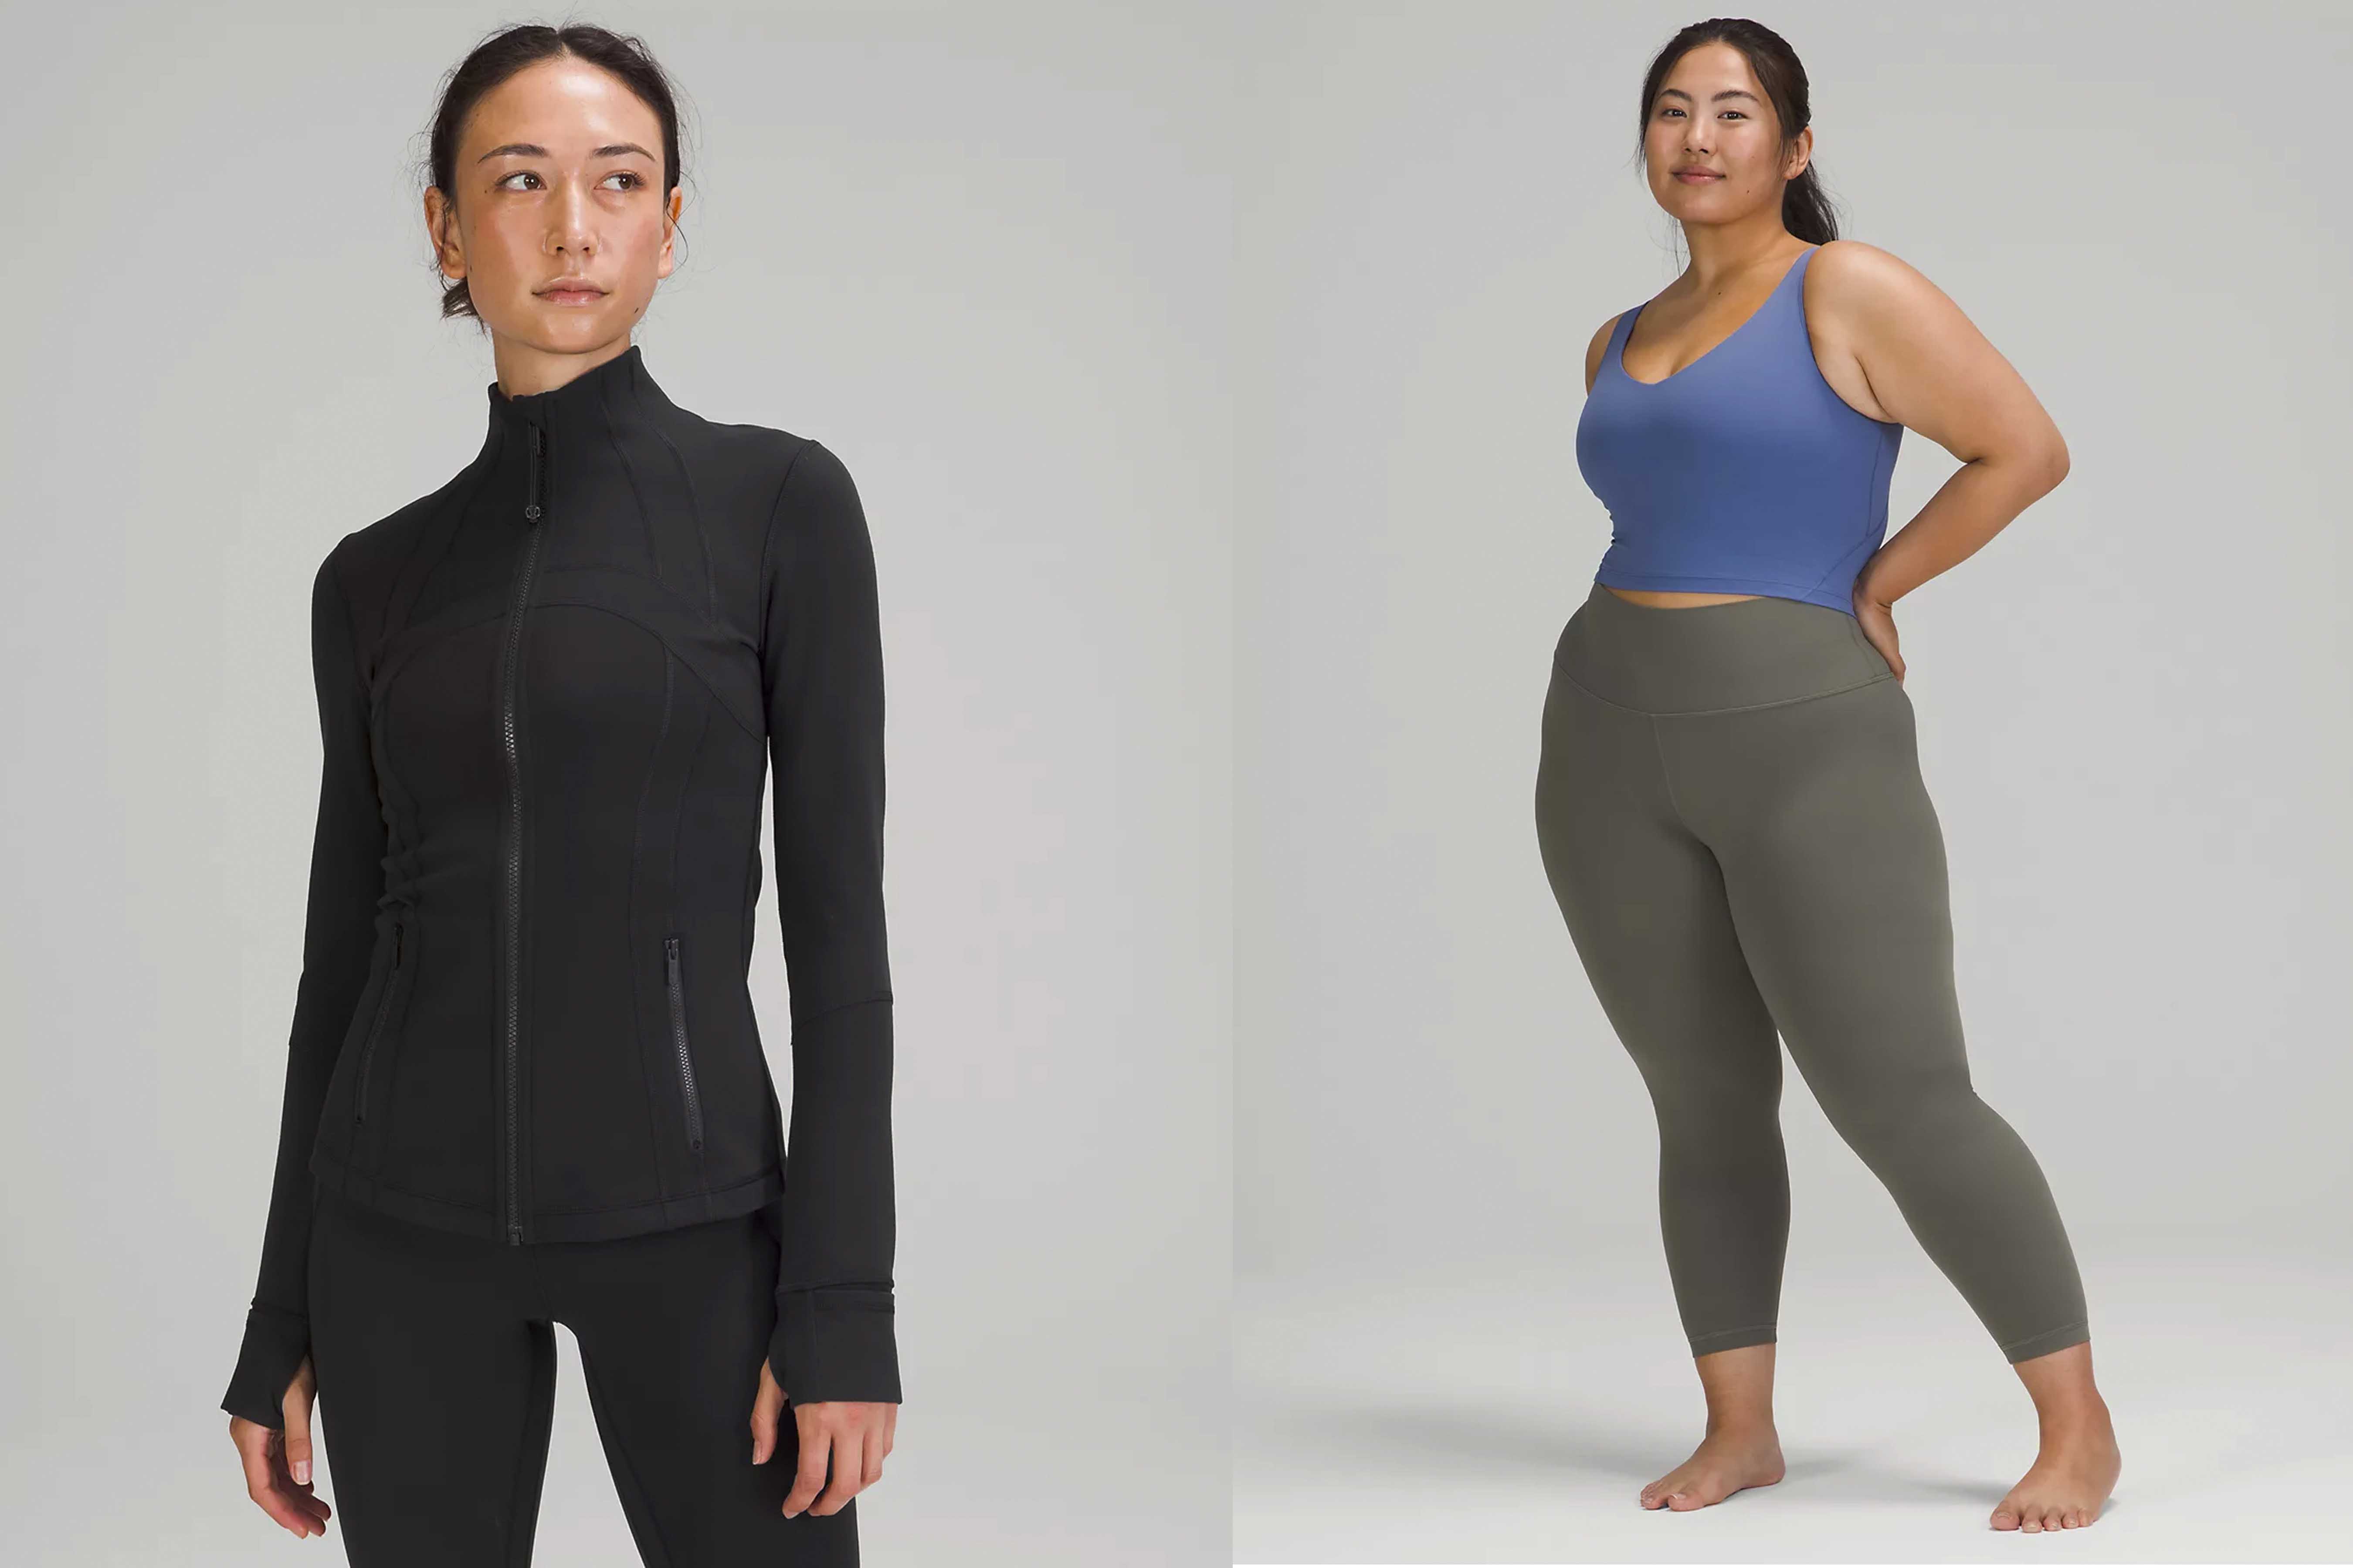 Activewear Brands Founded by Women